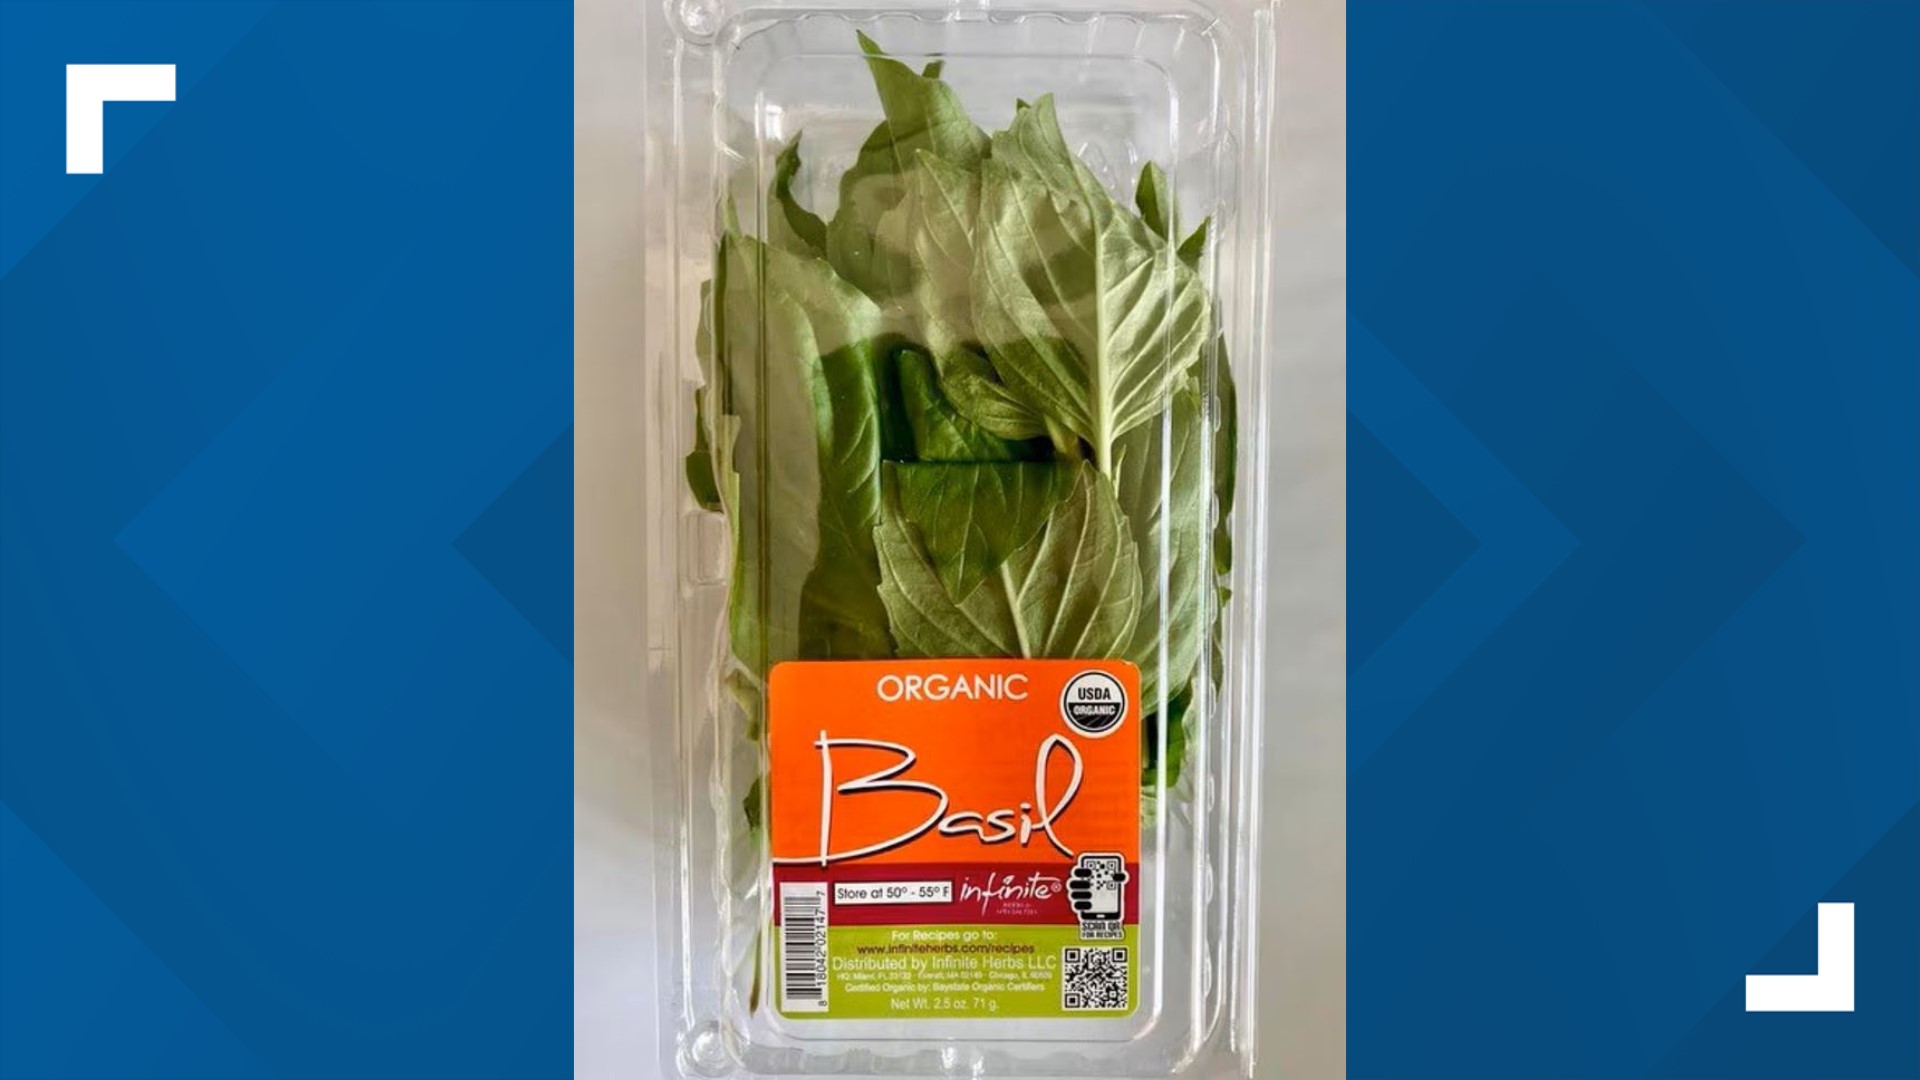 While the recalled basil is likely past its shelf-life, consumers should double check if they have any Trader Joe's basil in their refrigerator or freezer.